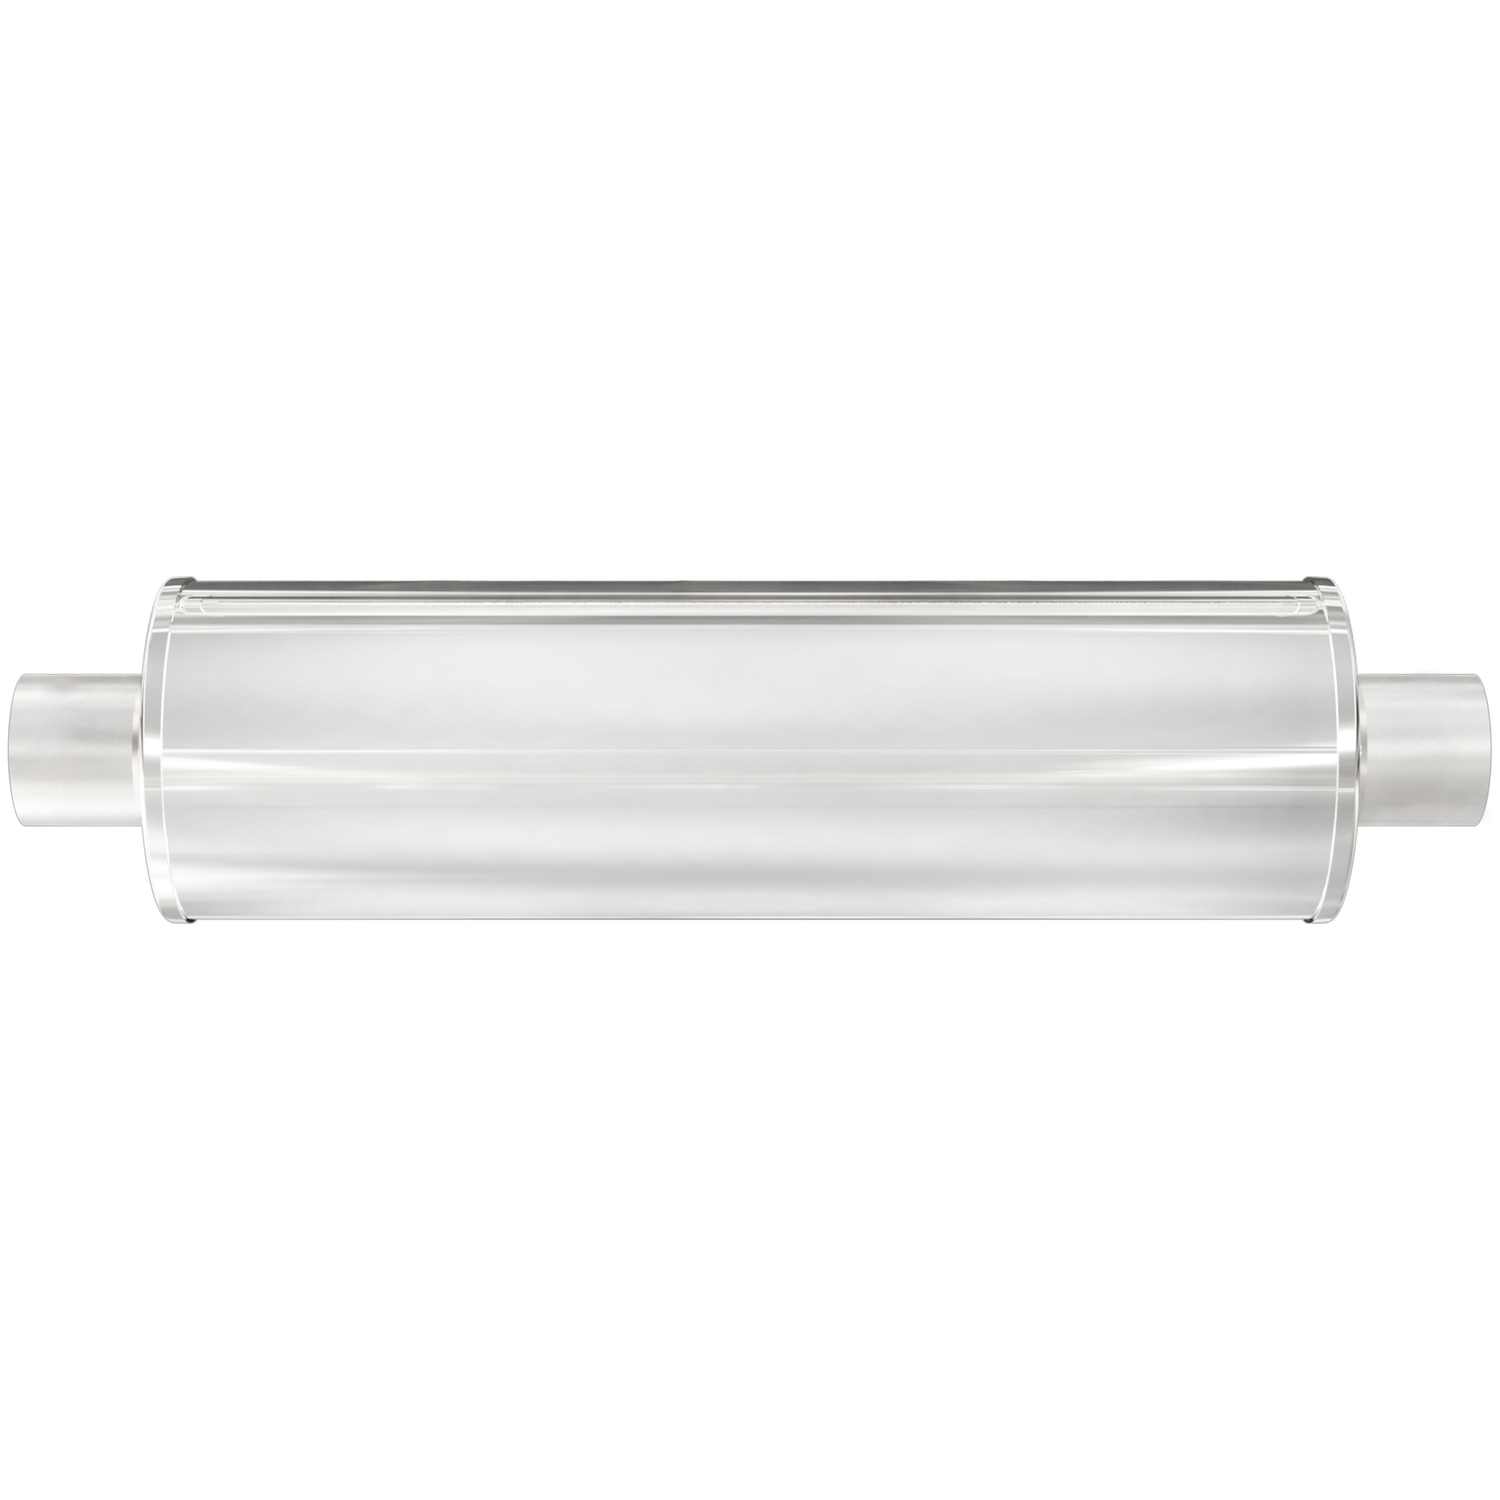 7" Round XL 3-Chamber Muffler Center In/Center Out: 3"/3" Body Length: 18" Overall Length: 24" Satin Finish